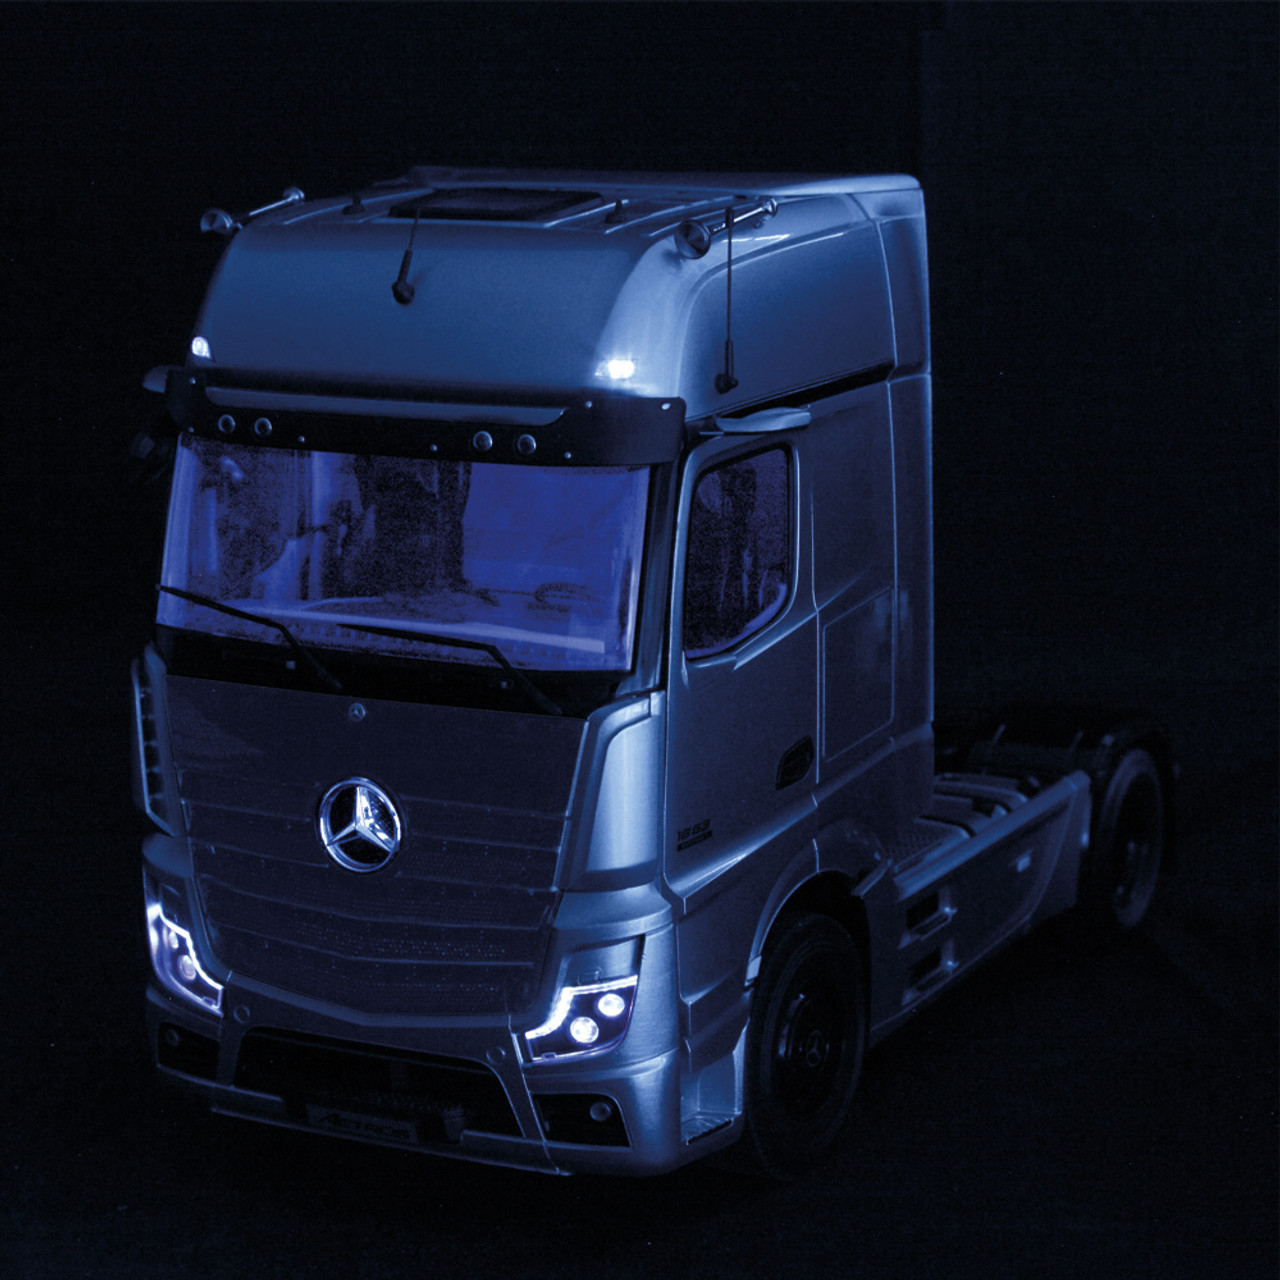 1/18 NZG Mercedes-Benz Actros GigaSpace 4x2 "Strohofer" with Lighting Diecast Car Model